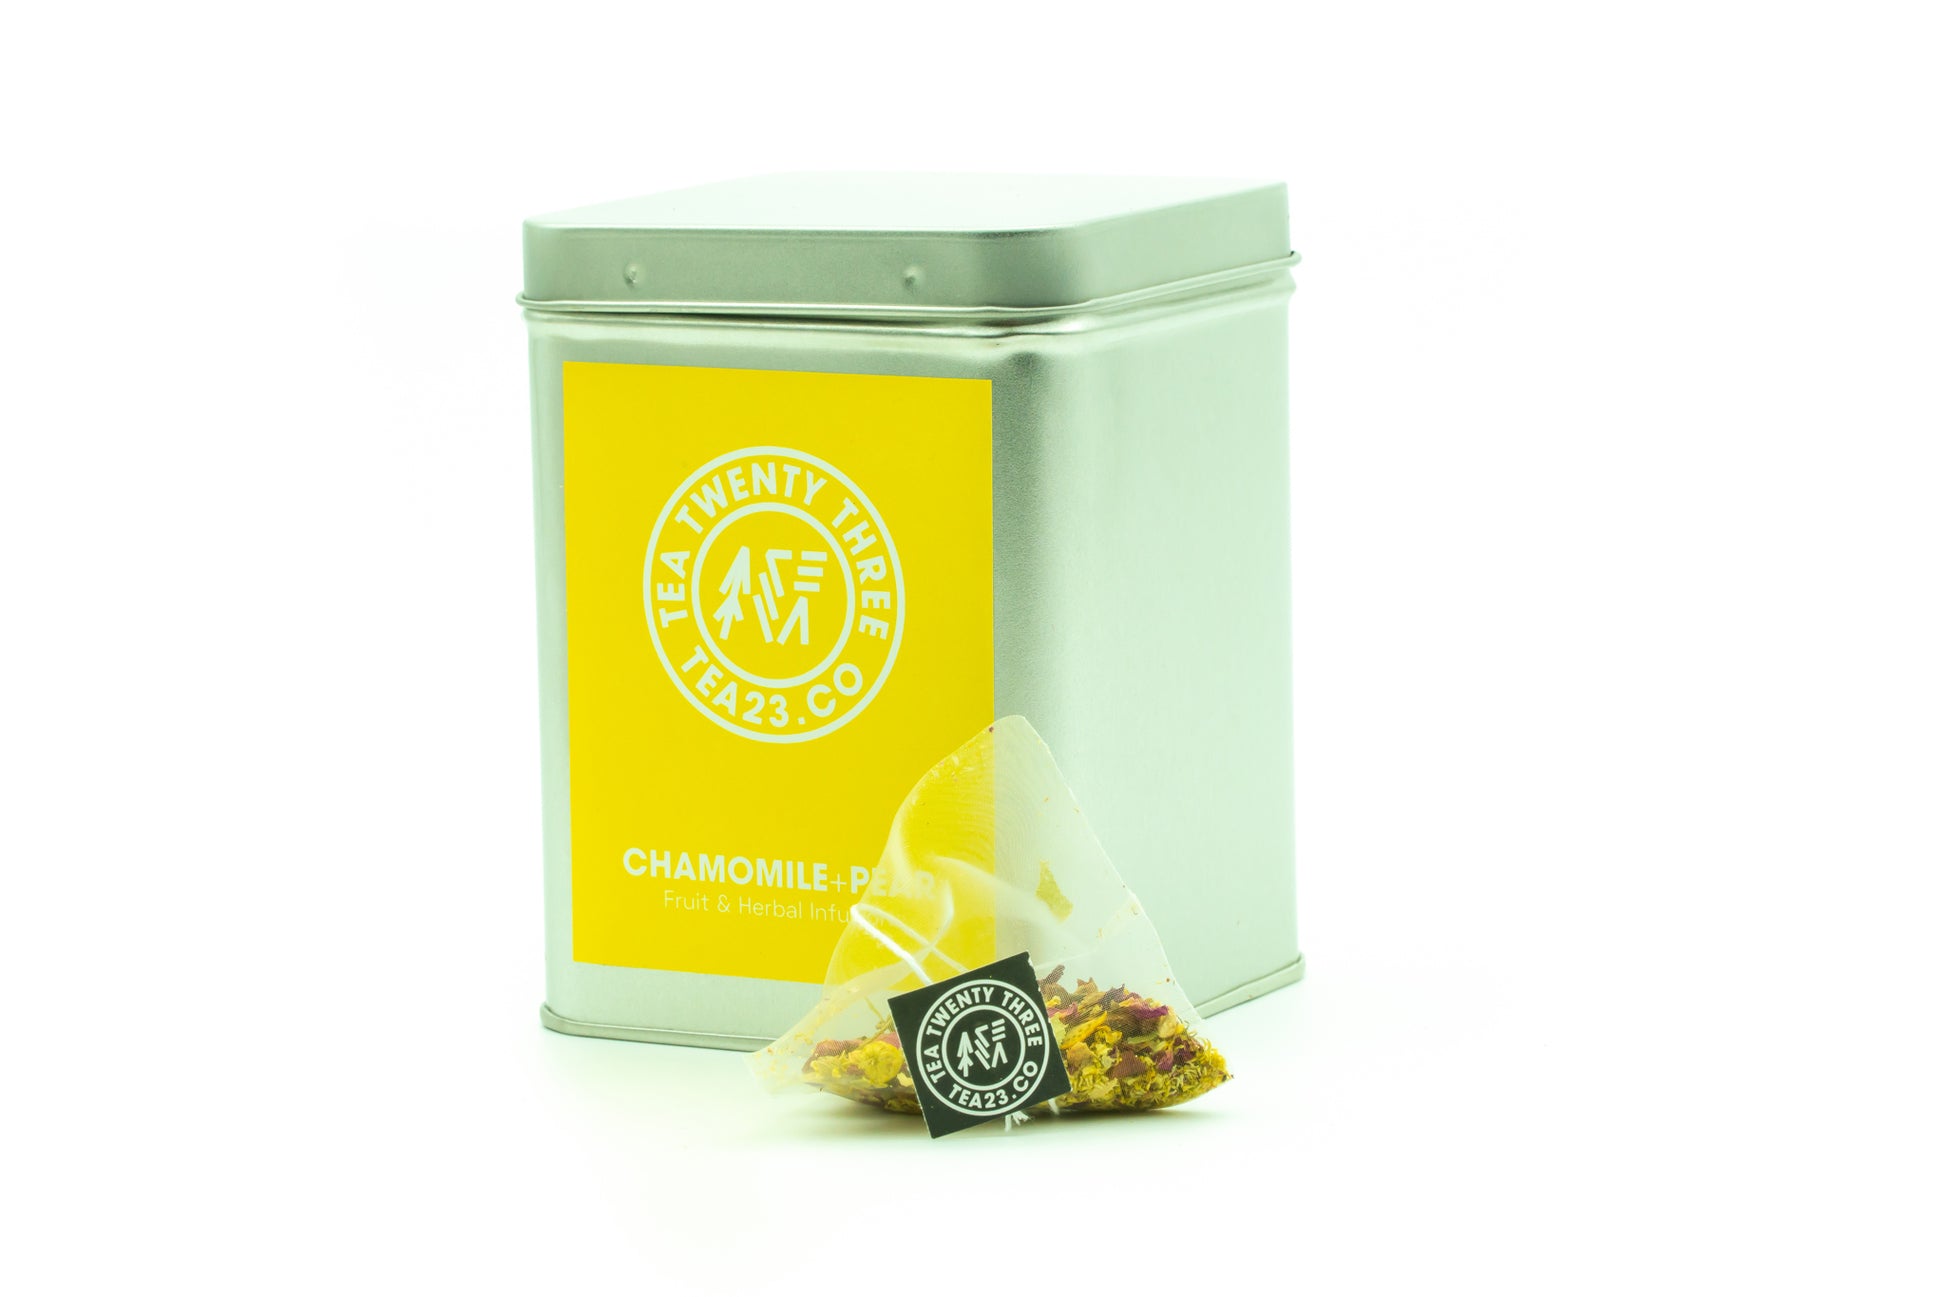 A Chamomile and Pear tea bag from Tea23 sits in front of a Tea23 tea caddy